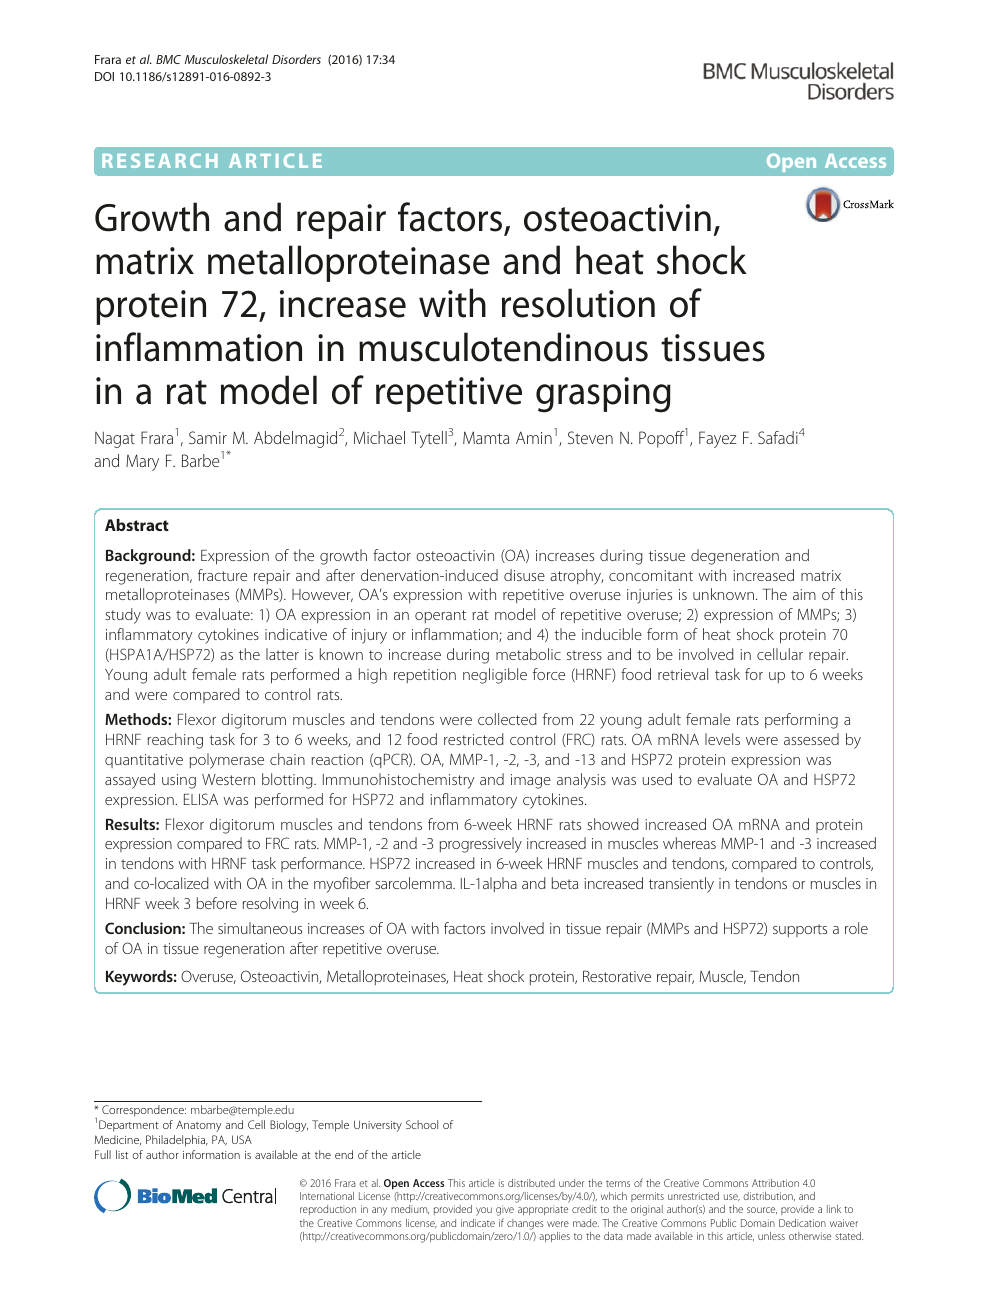 Growth And Repair Factors Osteoactivin Matrix Metalloproteinase And Heat Shock Protein 72 Increase With Resolution Of Inflammation In Musculotendinous Tissues In A Rat Model Of Repetitive Grasping Topic Of Research Paper